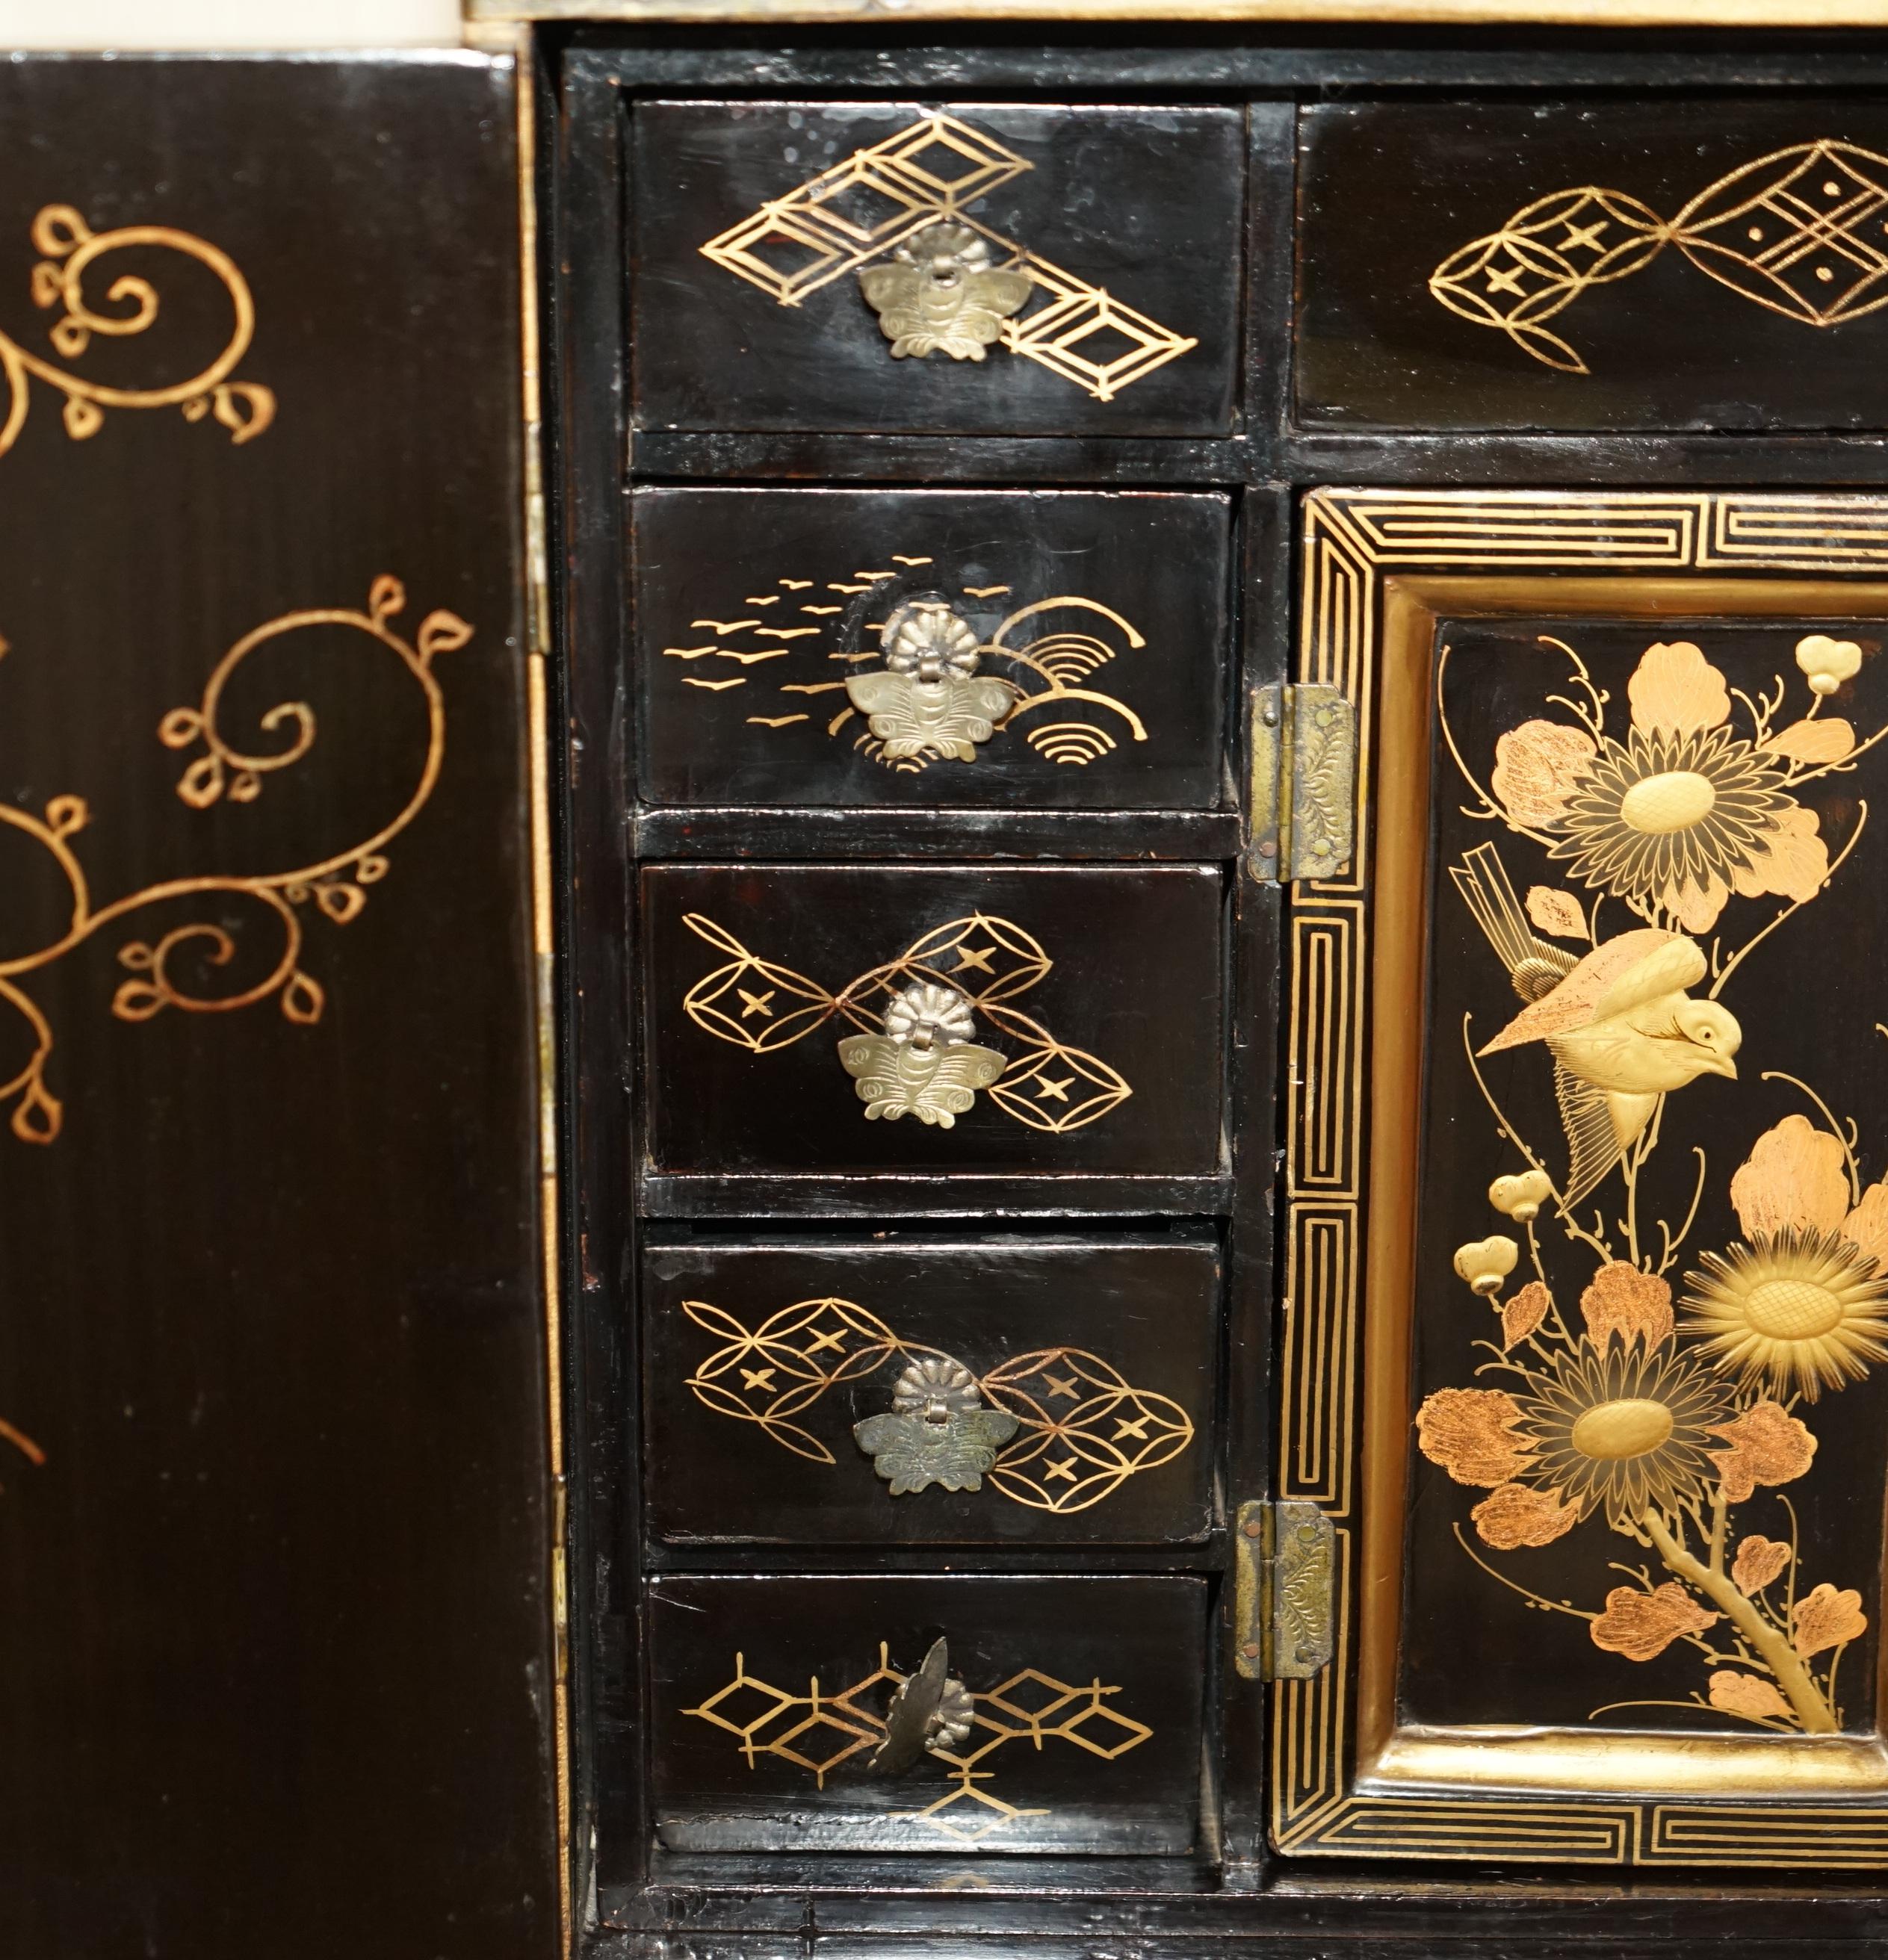 Rare Oriental Chinese Export Antique Cabinet Lots of Drawers for Fine Teas 12